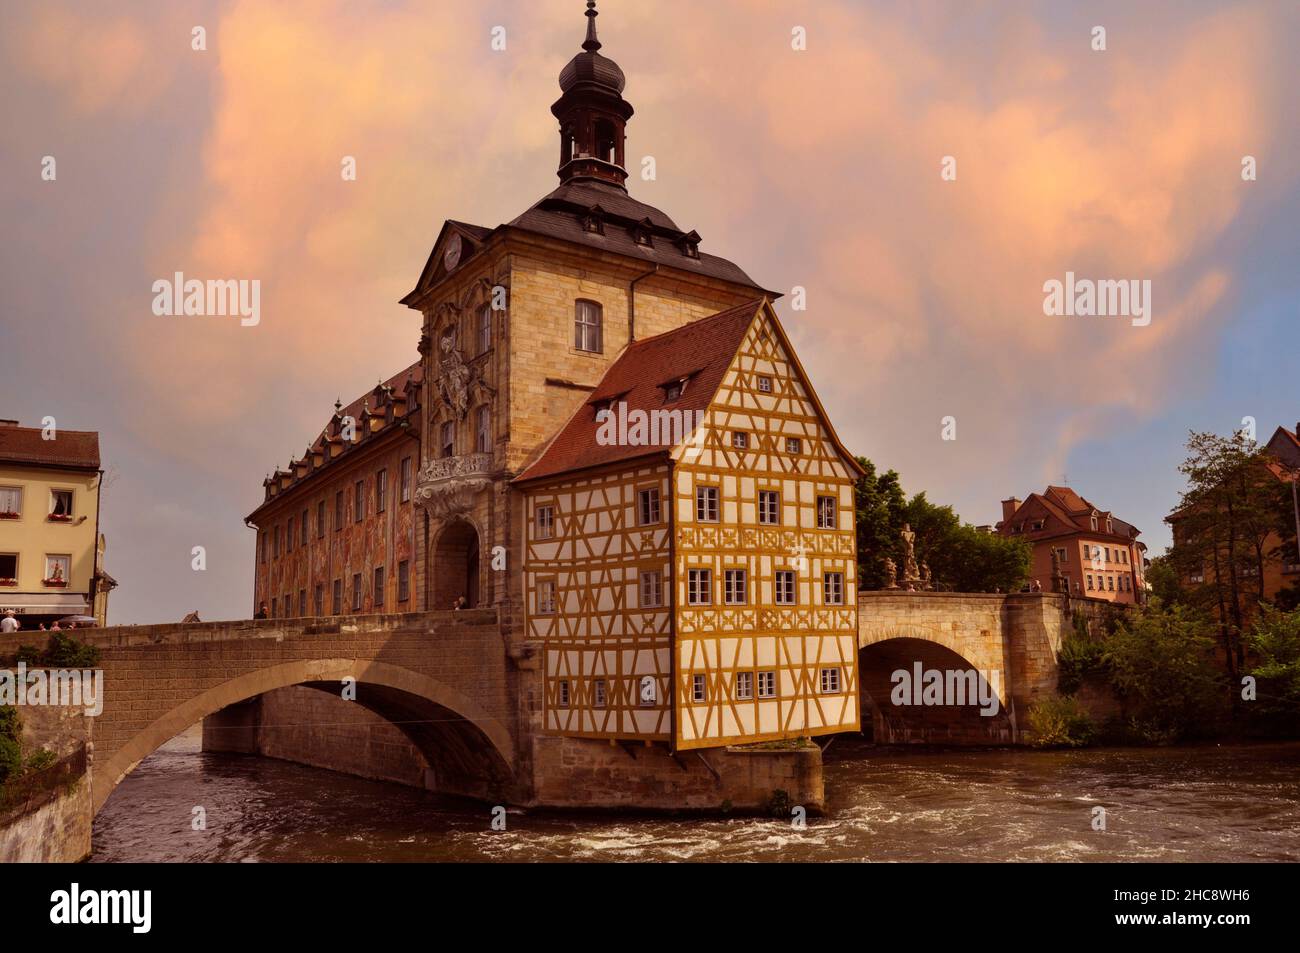 The old Town Hall (Altes Rathaus) on an island with two bridges over the Regnitz, in Bamberg, Germany Stock Photo